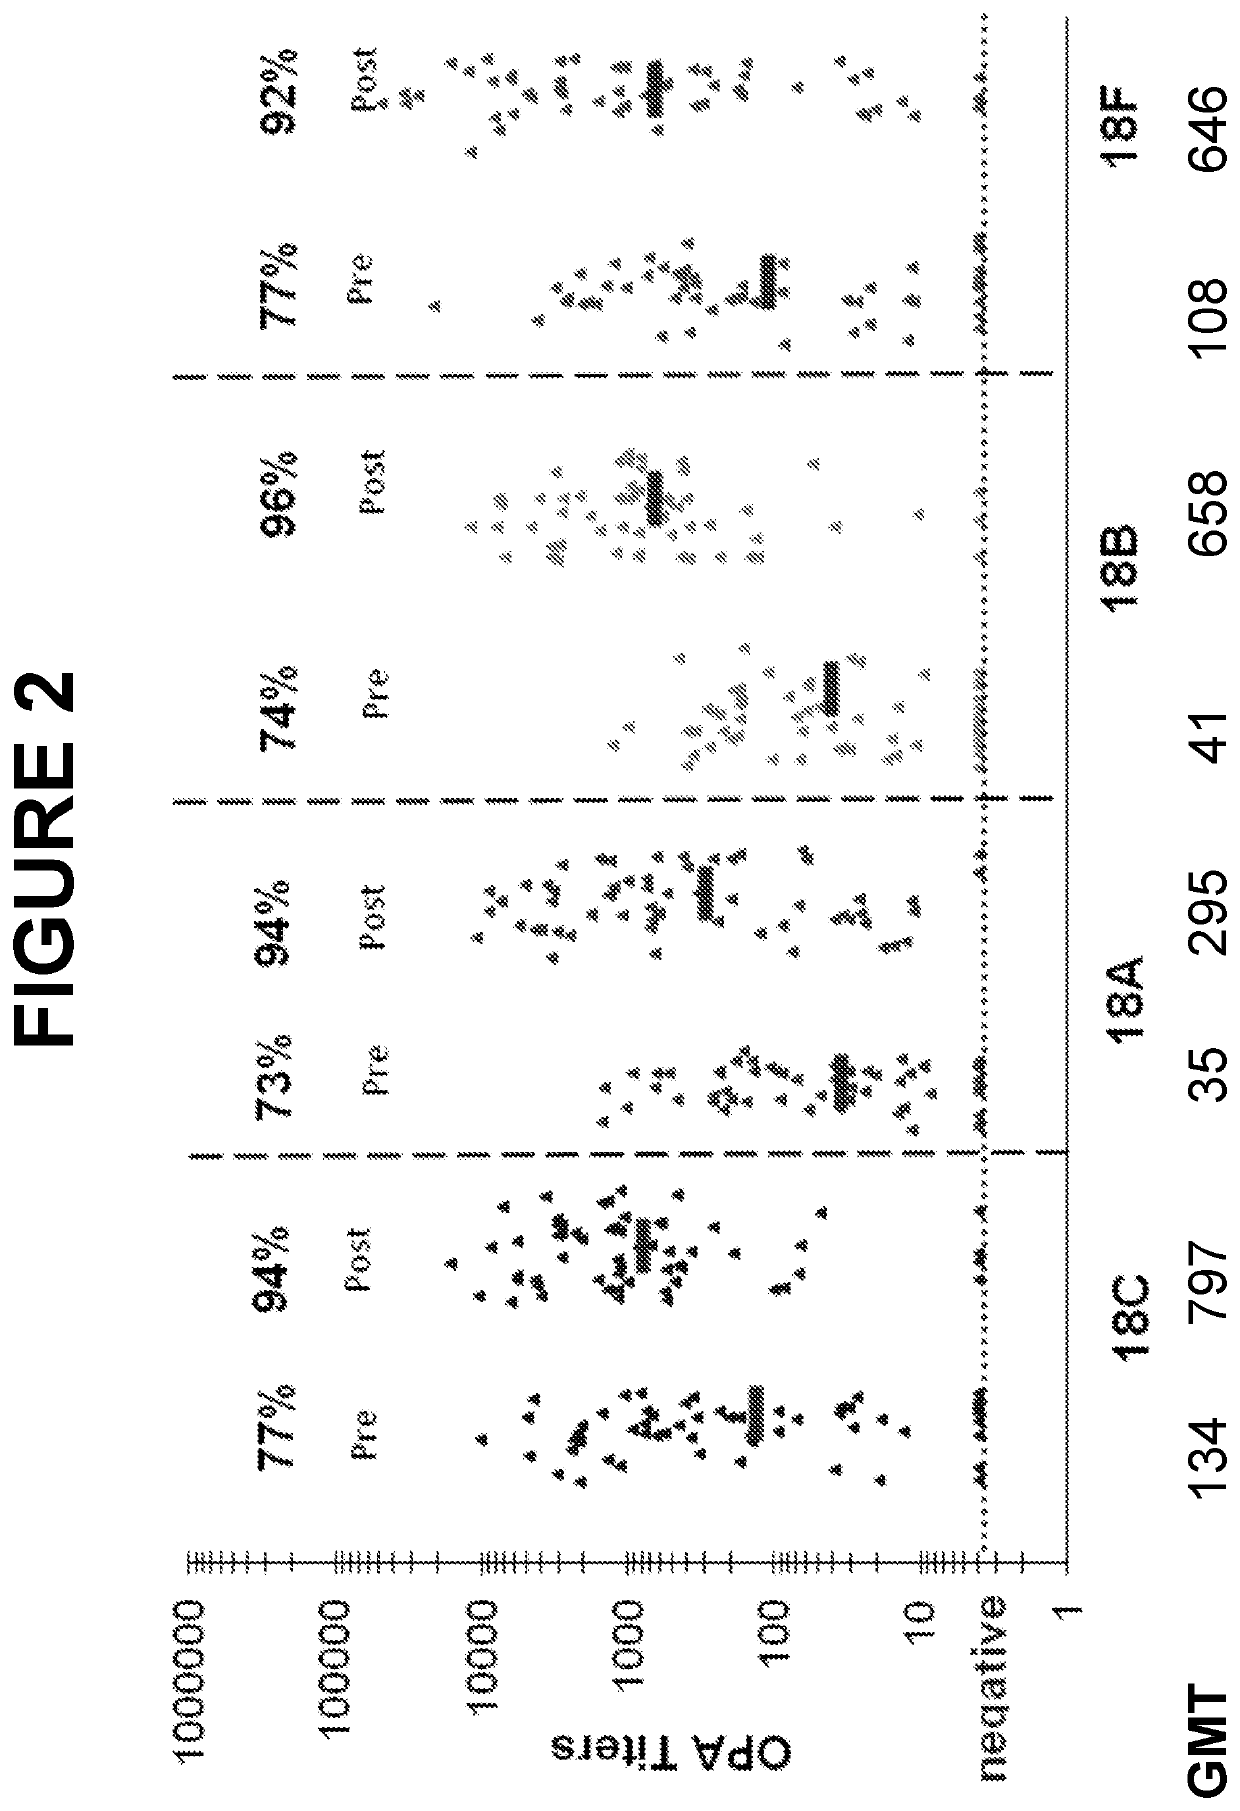 Immunogenic compositions for use in pneumococcal vaccines